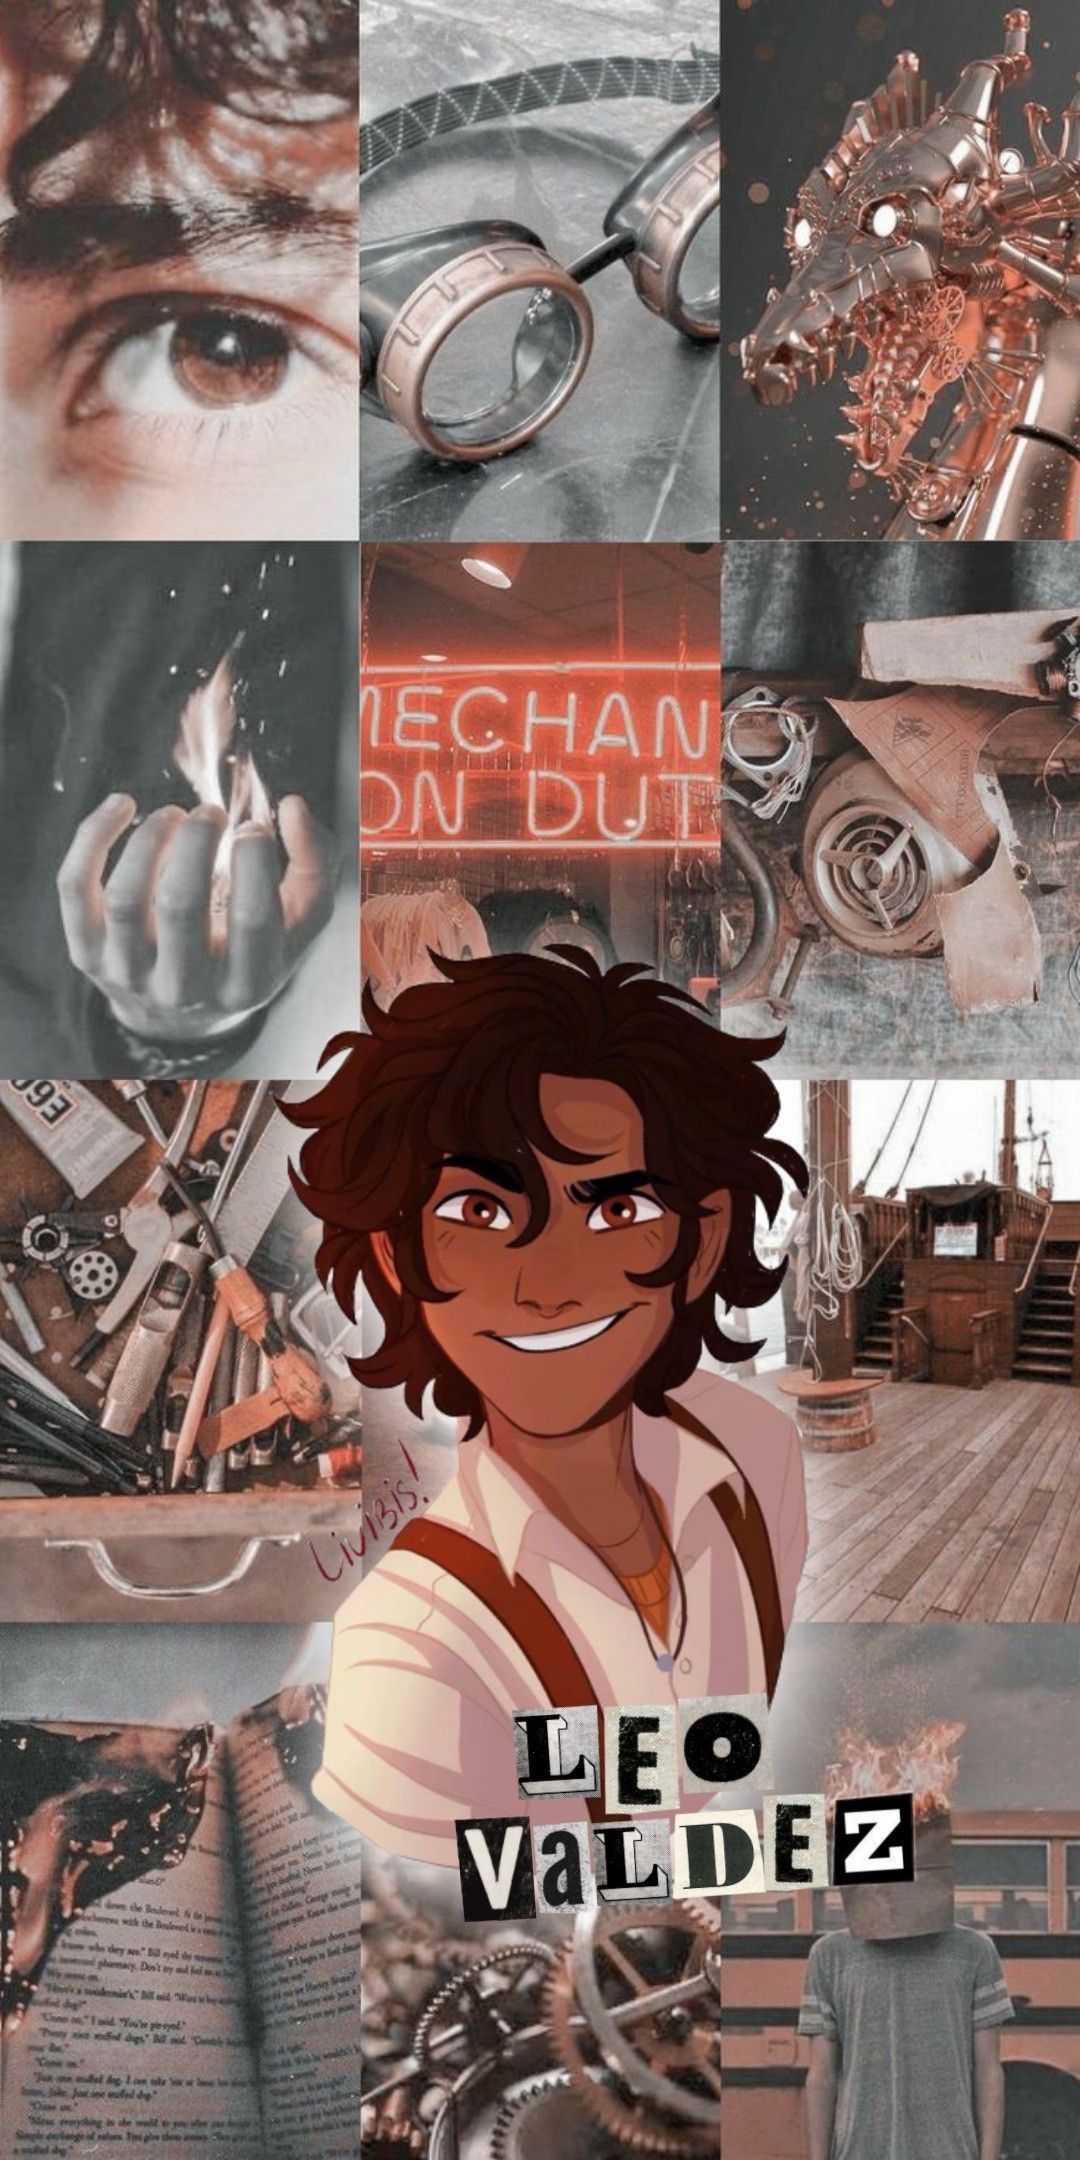 Collage of images of the character Leo Valdez from the book series The Heroes of Olympus - Leo Valdez